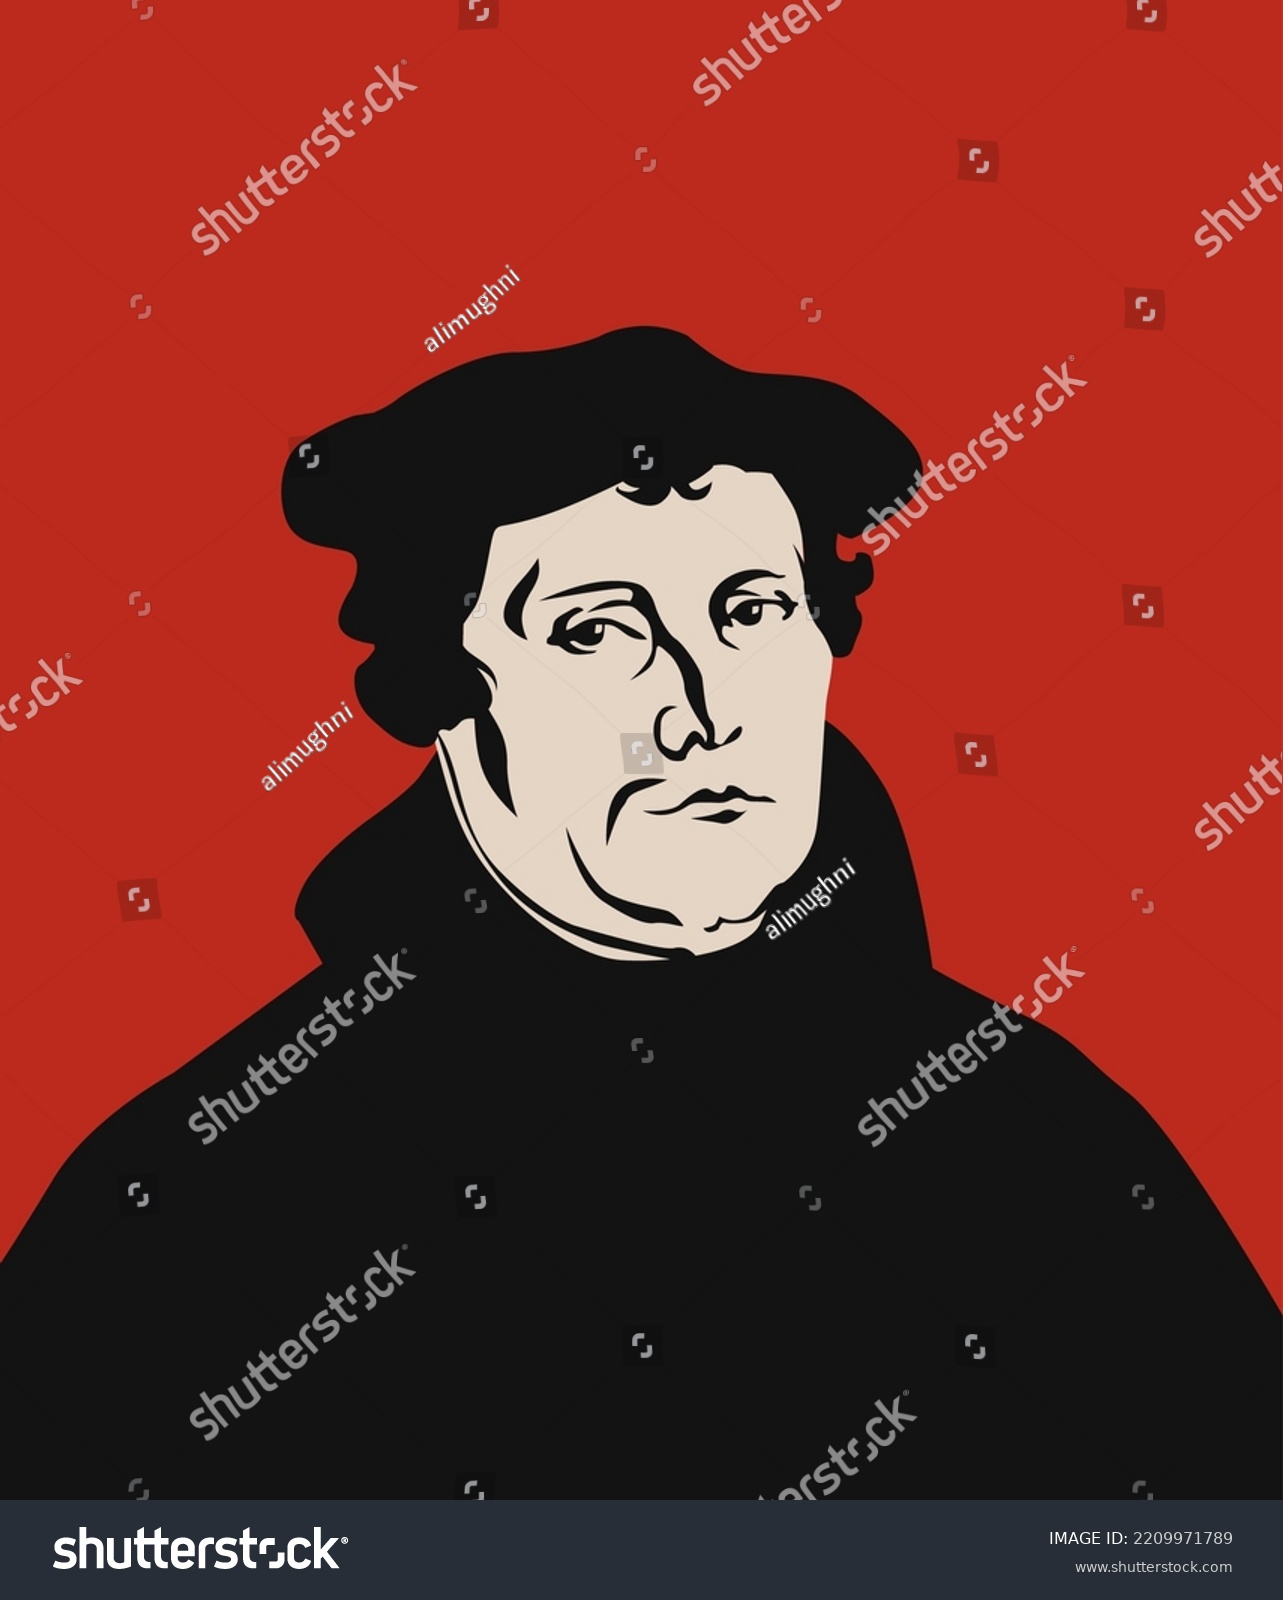 reformation day, portrait of martin luther vector image #2209971789